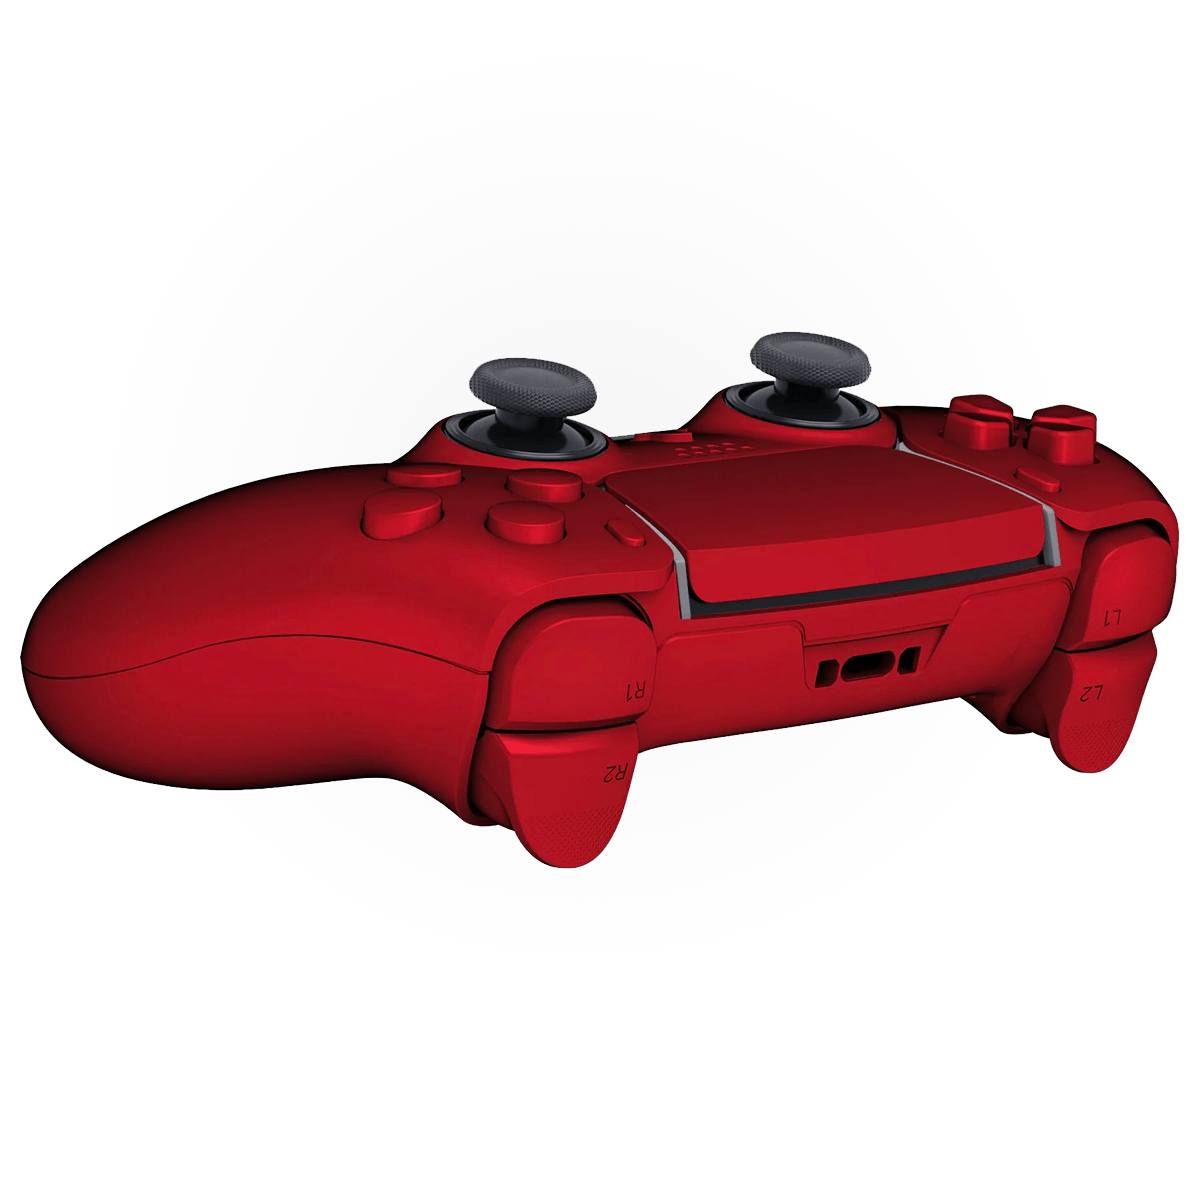 SOFT TOUCH RED PS5 DualSense Edge Custom Modded Wireless Controller